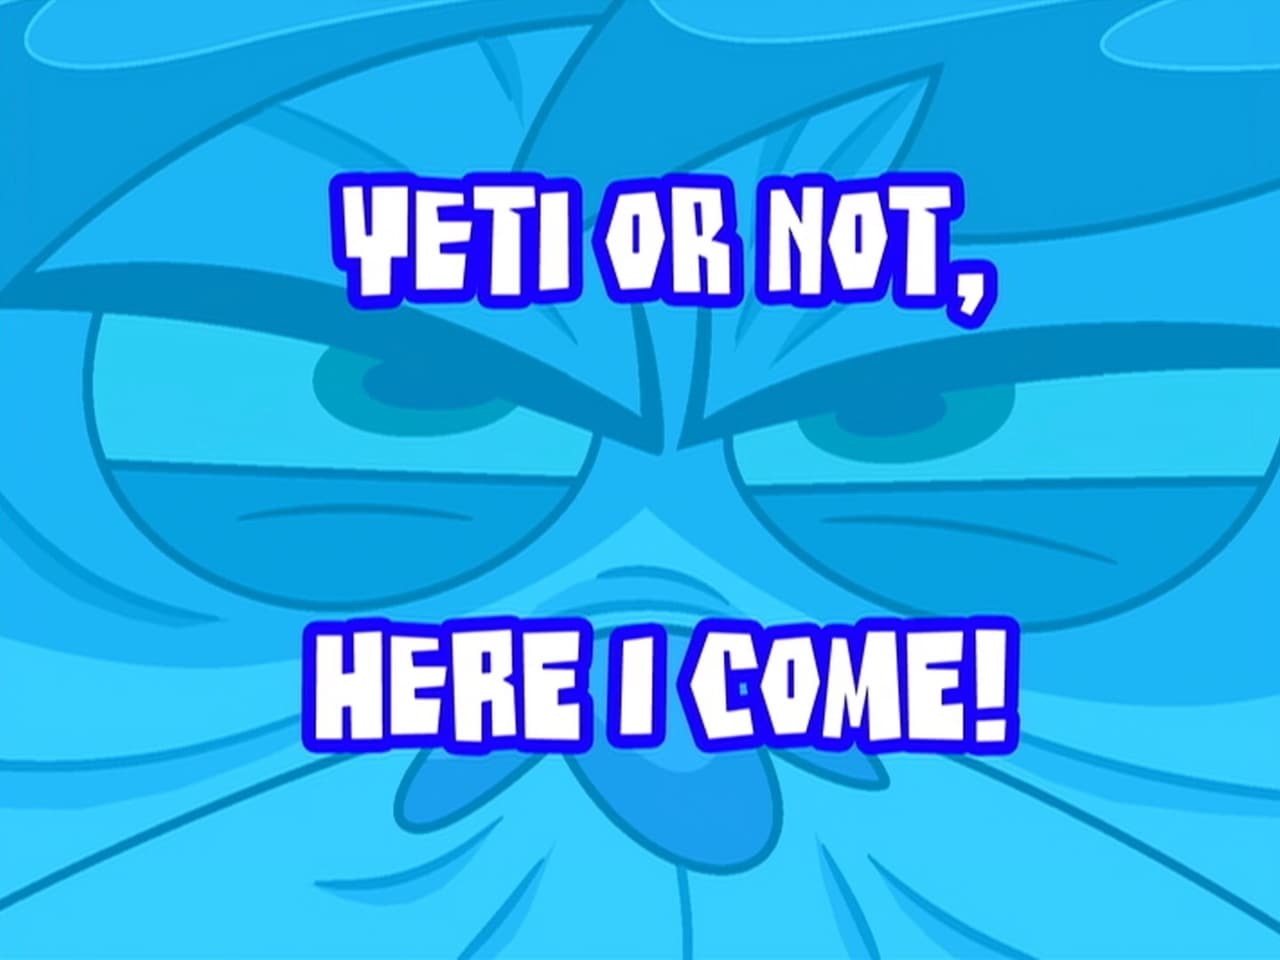 The Grim Adventures of Billy and Mandy - Season 7 Episode 6 : Yeti or Not, Here I Come